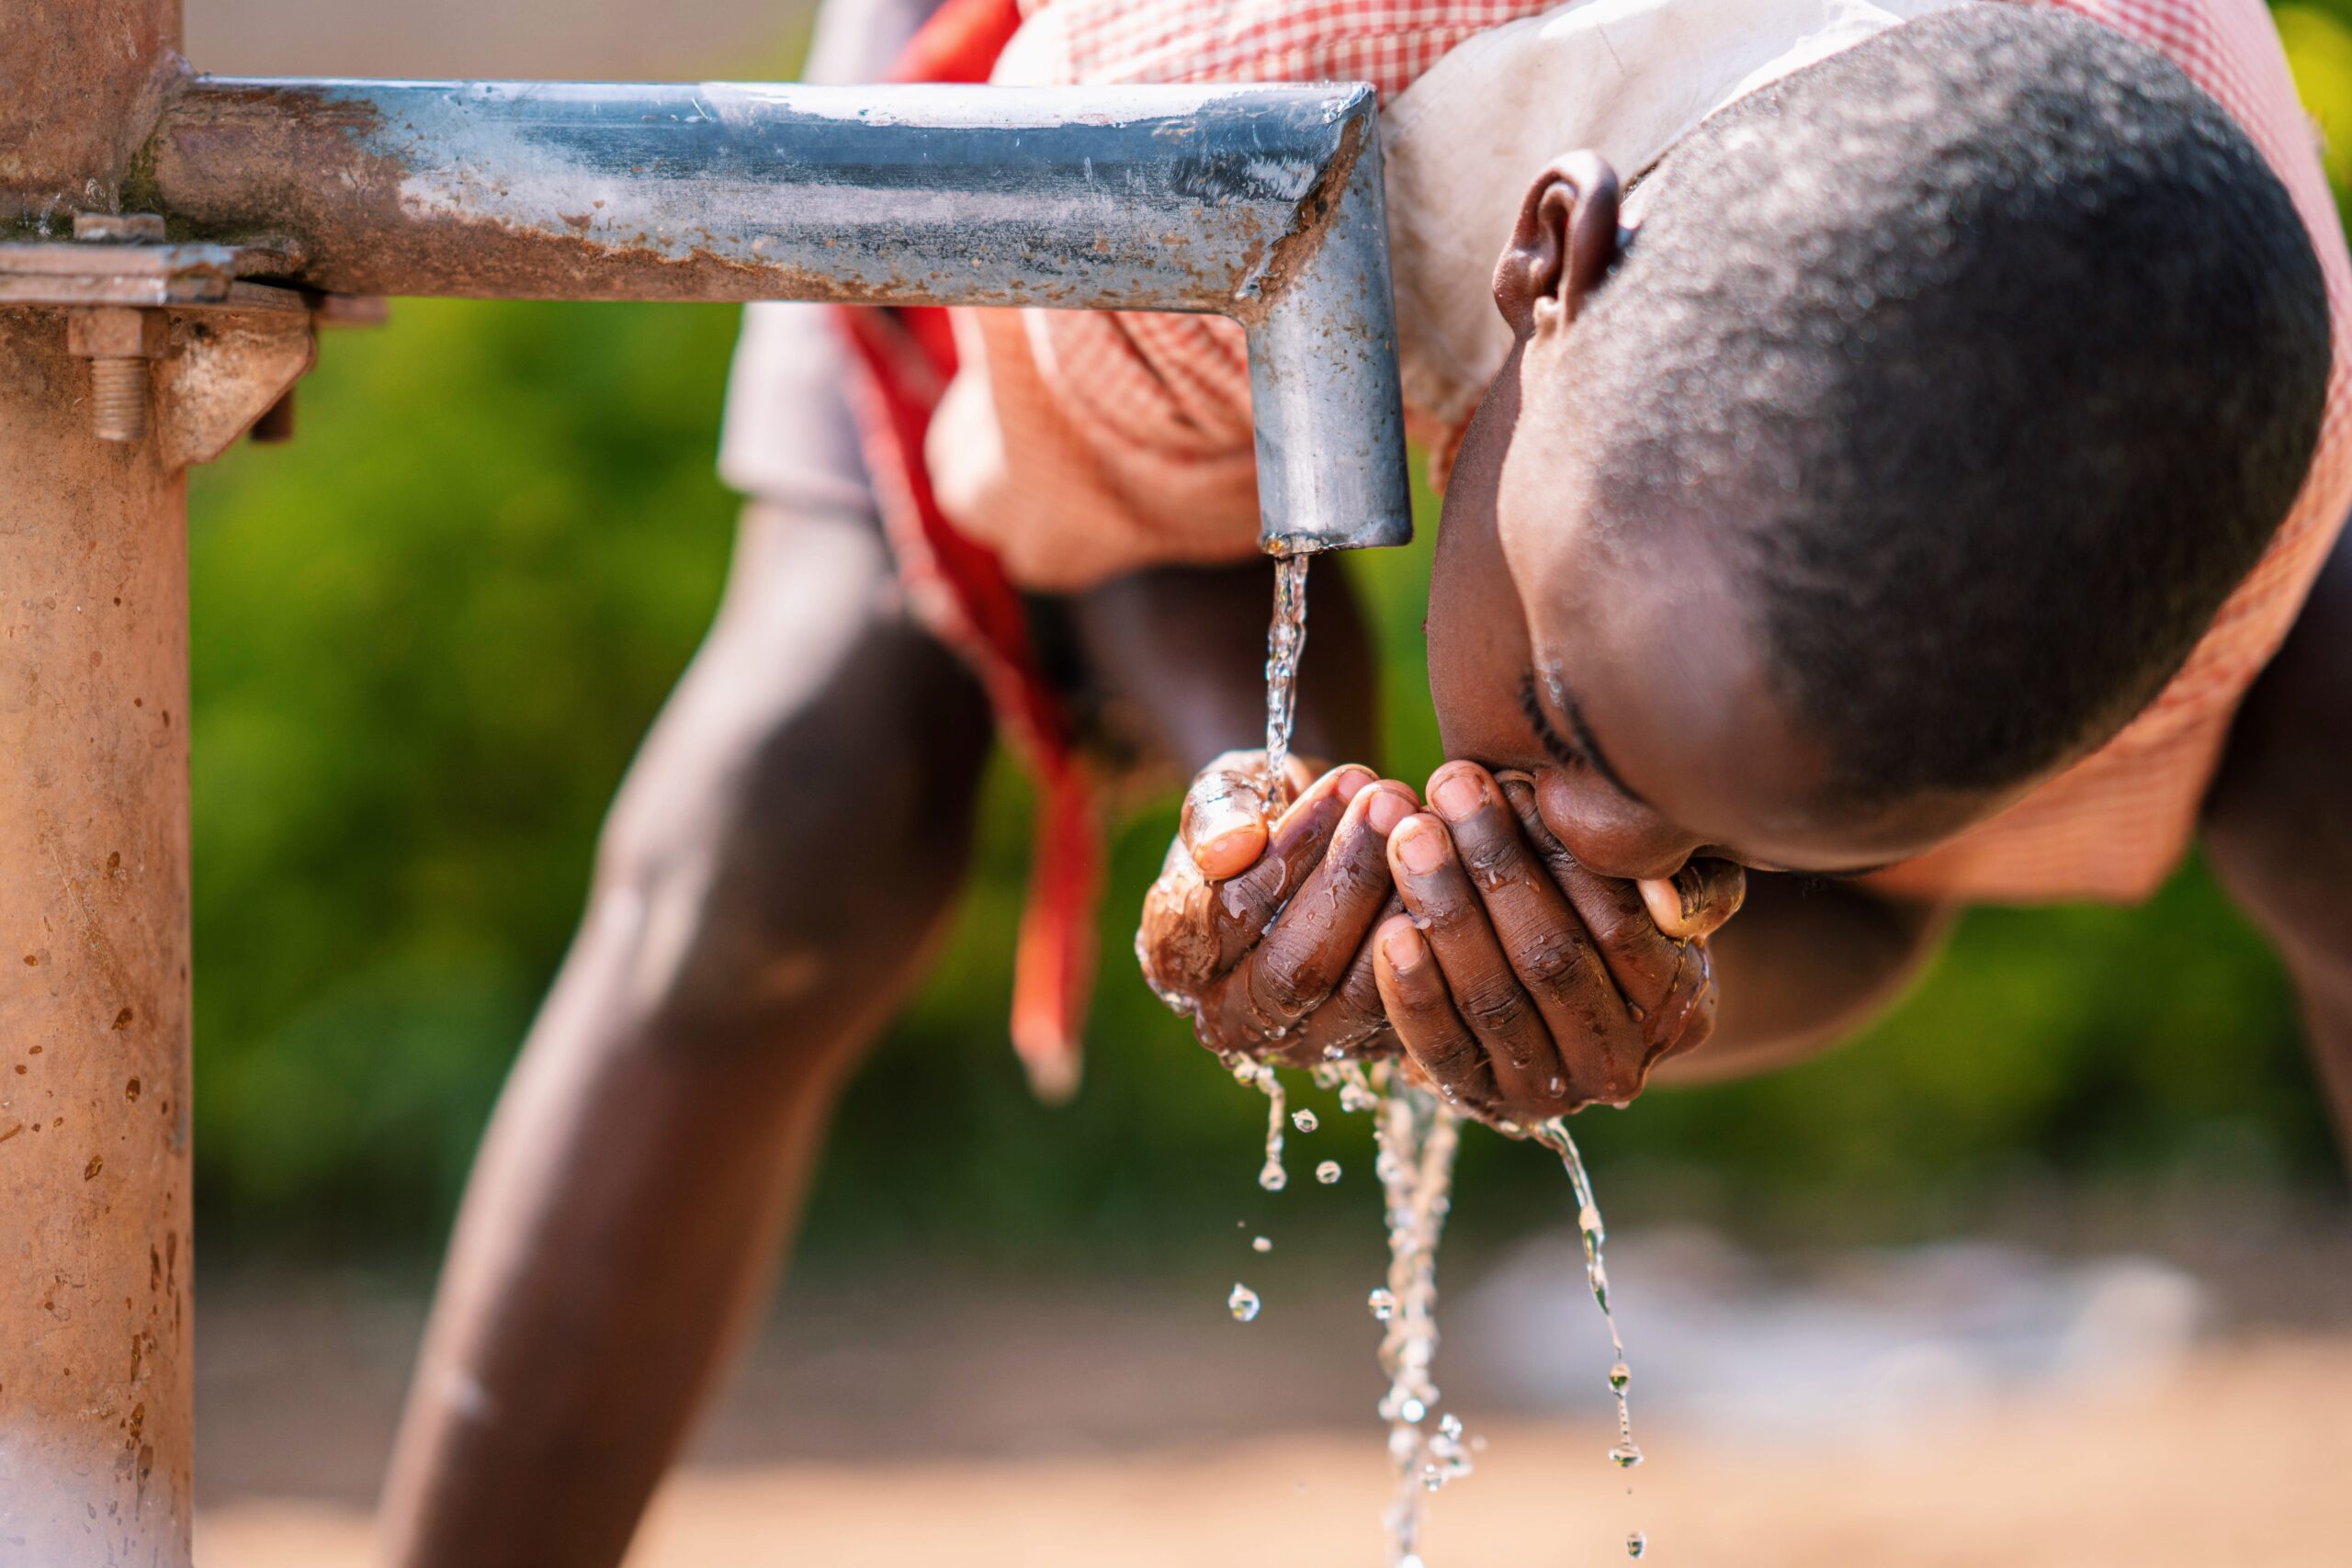 Child drinking water with hands